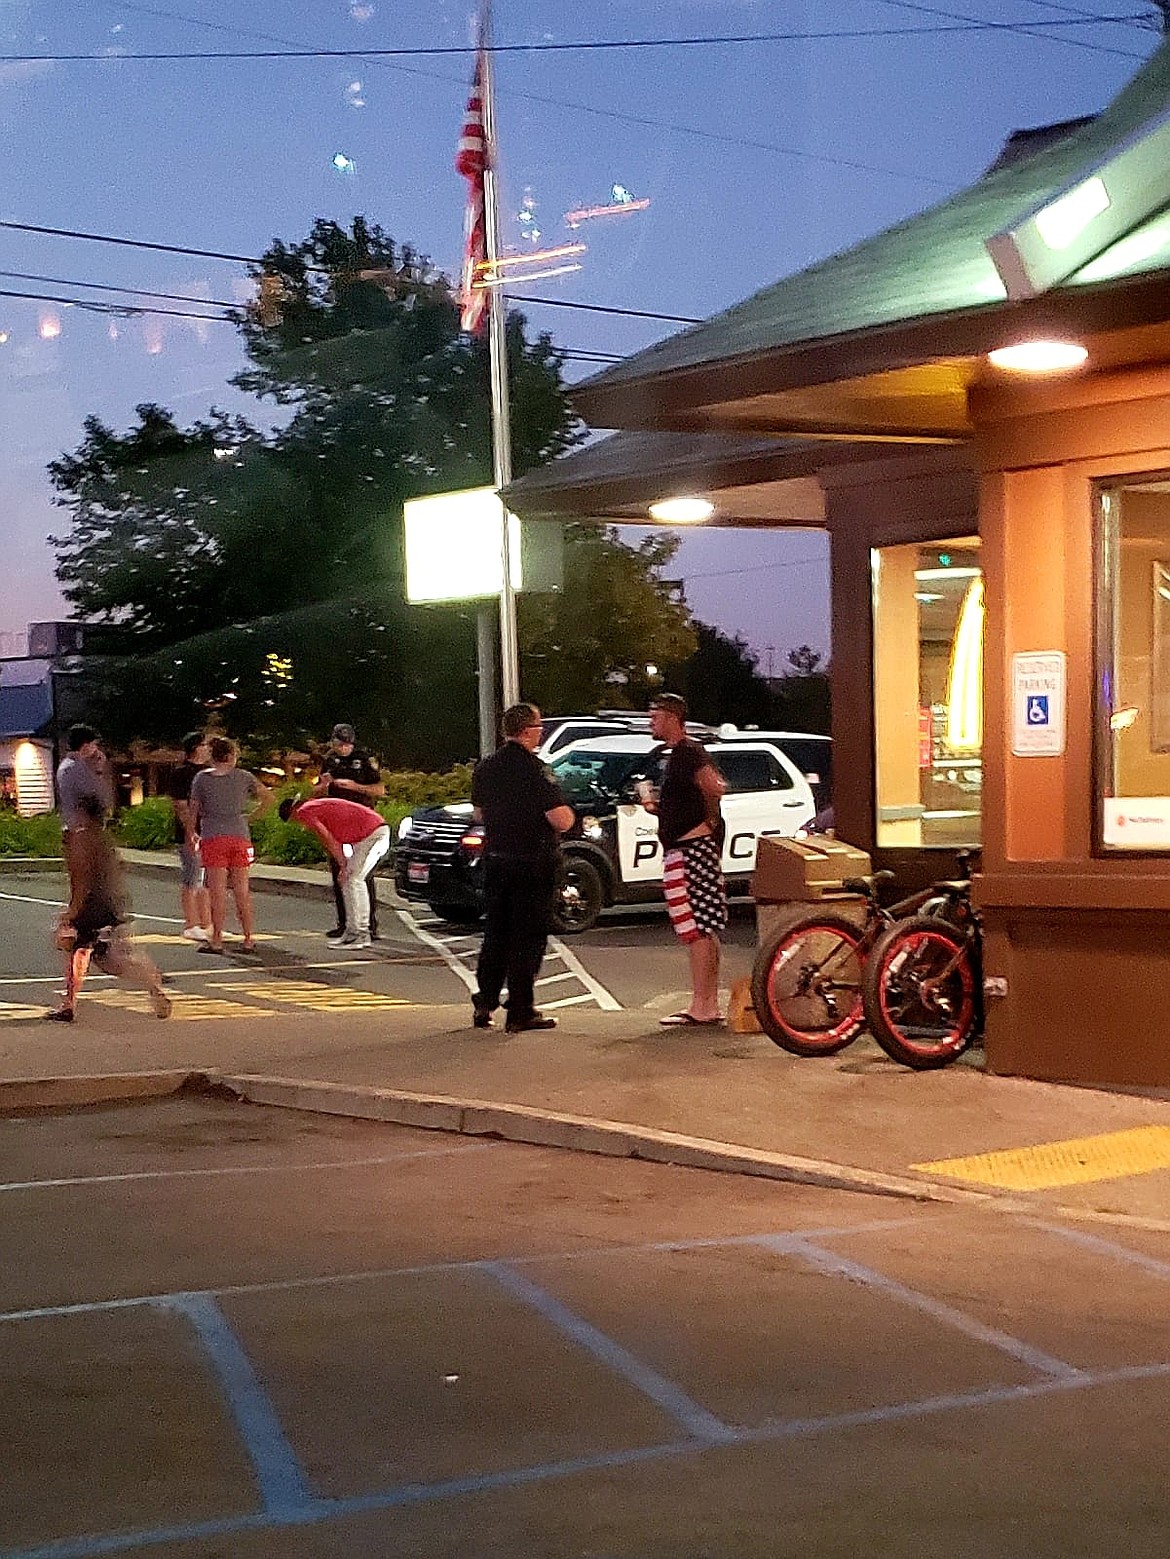 Police question witnesses outside the McDonald's restaurant on Hanley Avenue in Coeur d'Alene on July 12 after an incident that led to the July 17 arrest of Richard Sovenski, of Hayden, who is charged with battery and malicious harassment. (Photo courtesy of Chris Morse)